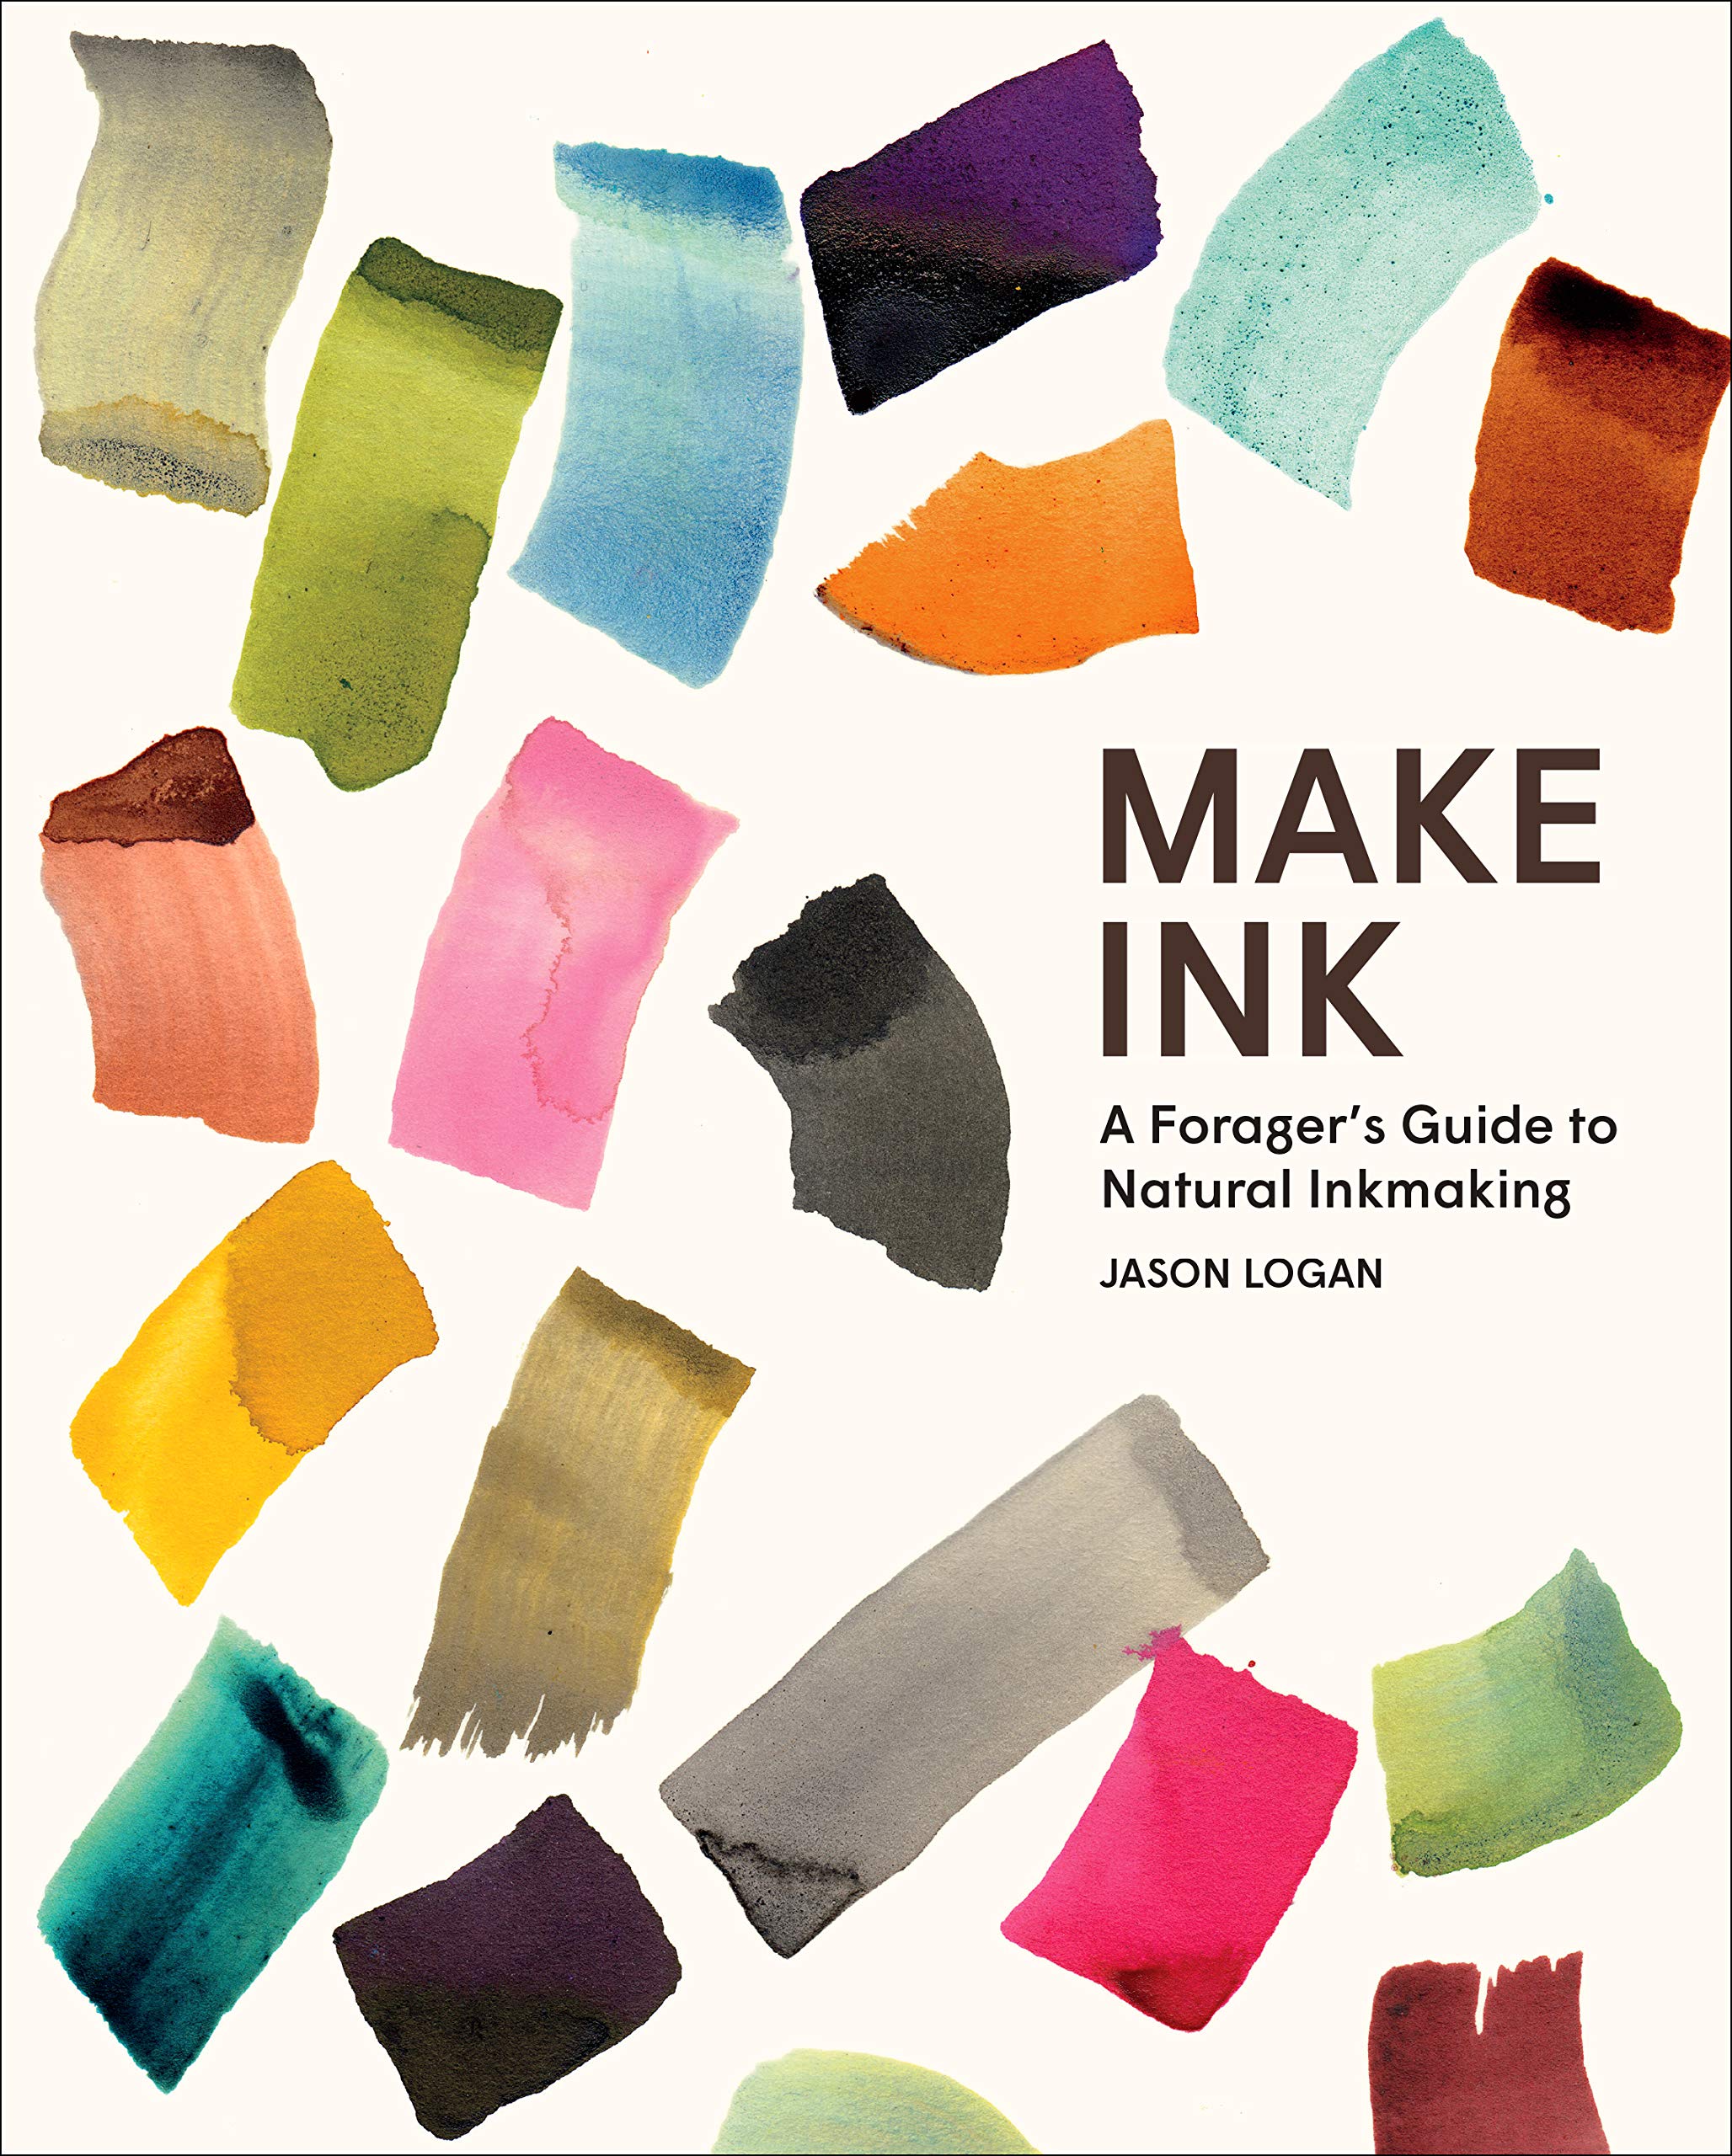 Pick of the Week: Make Ink: A Forager’s Guide to Natural Inkmaking